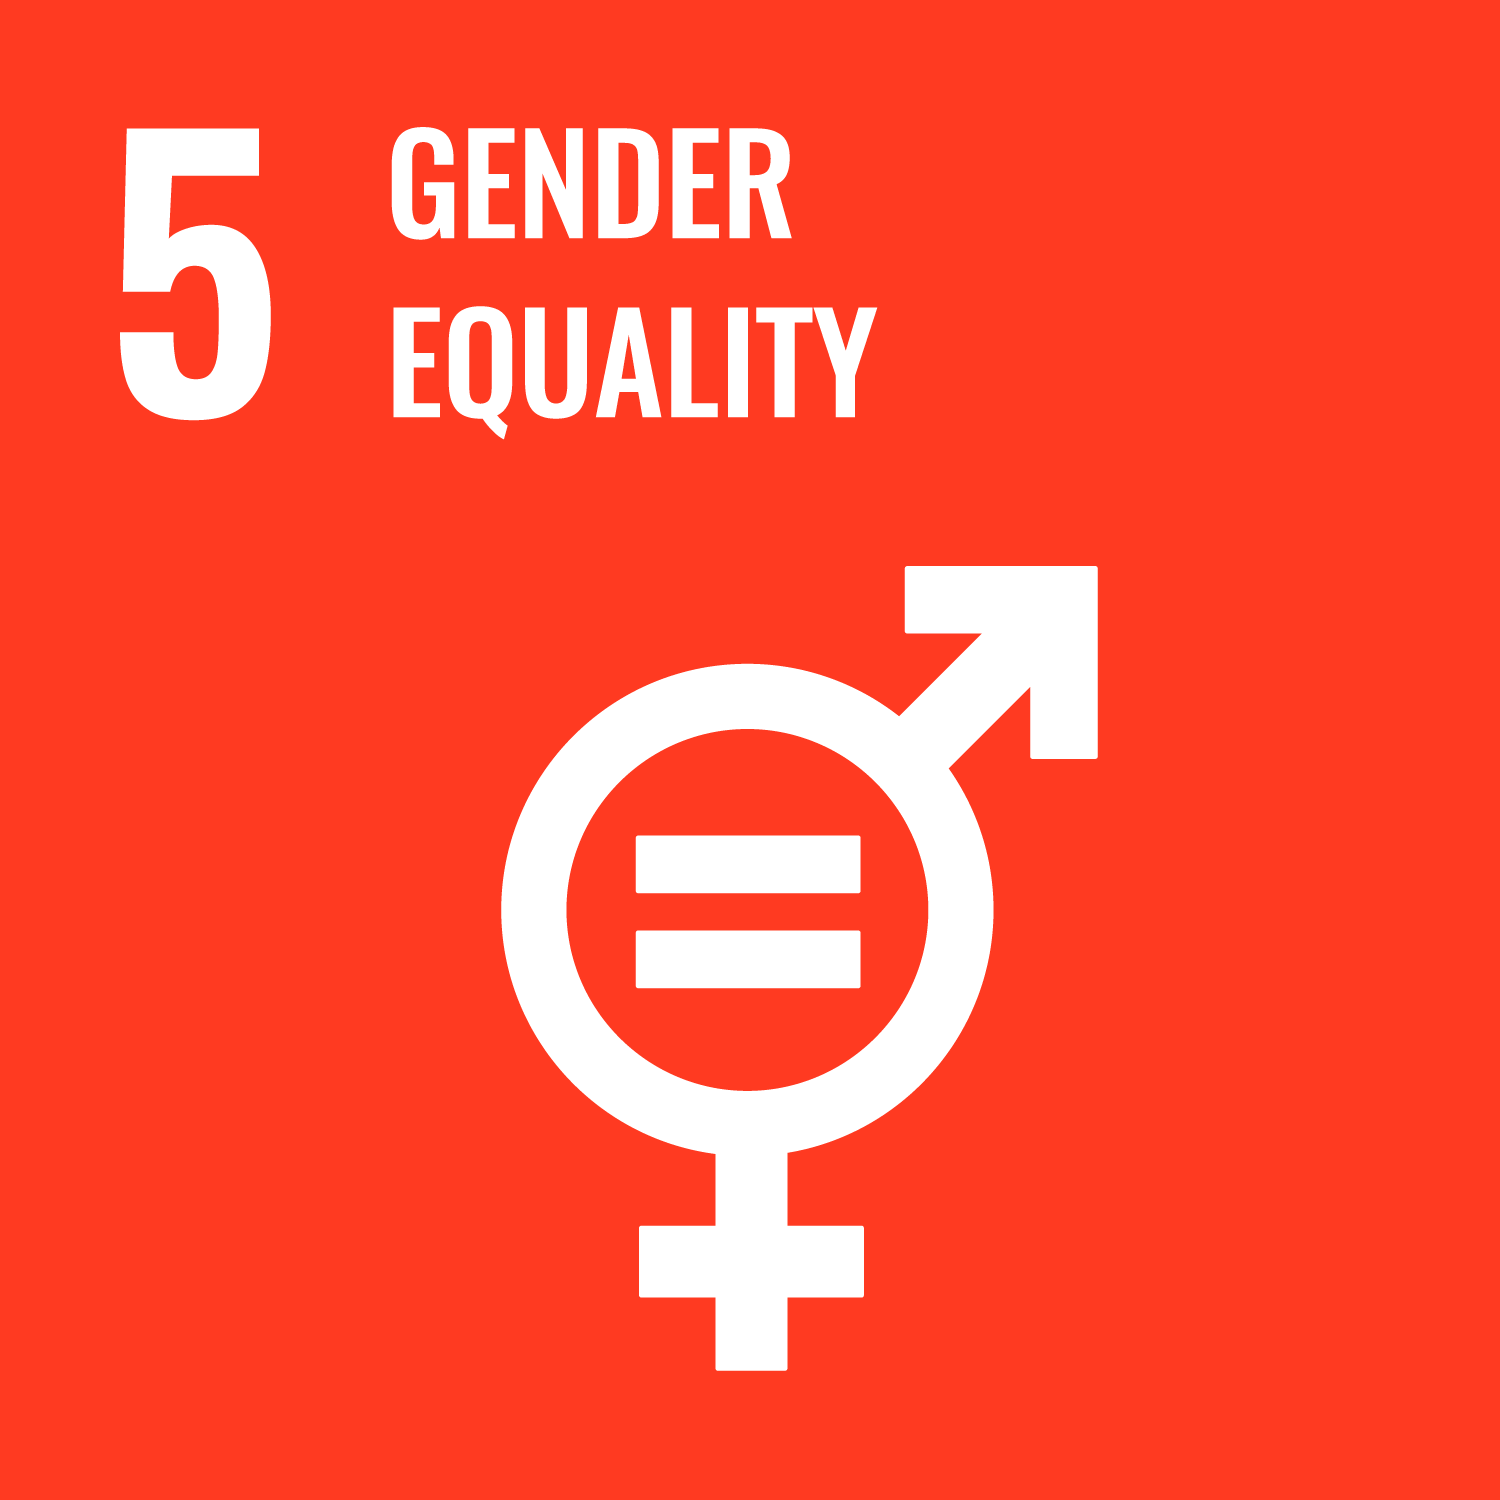 Goal number 5 of the SDGs: Gender Equality